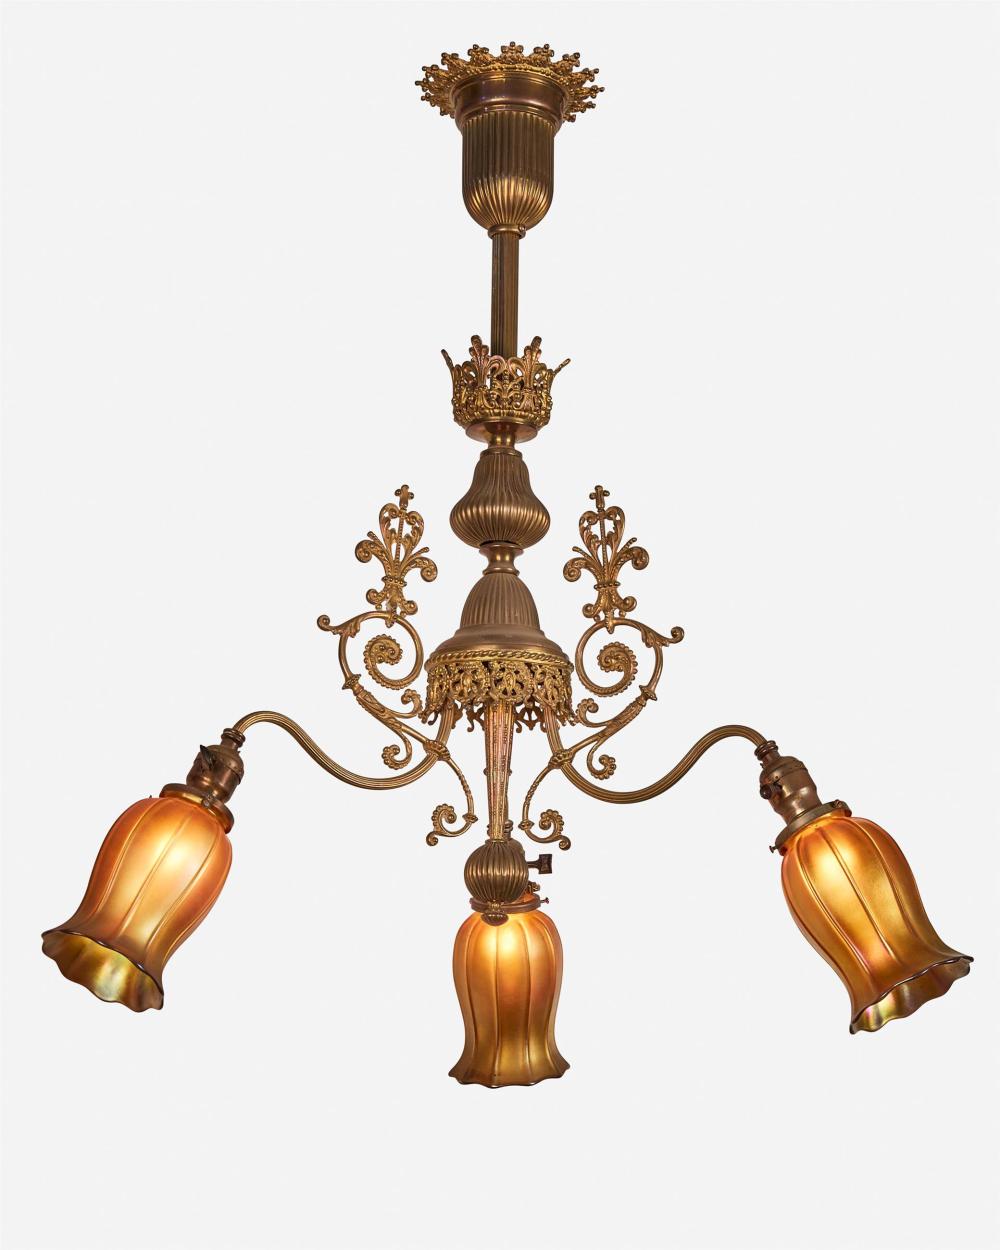 A VICTORIAN-STYLE CHANDELIER WITH